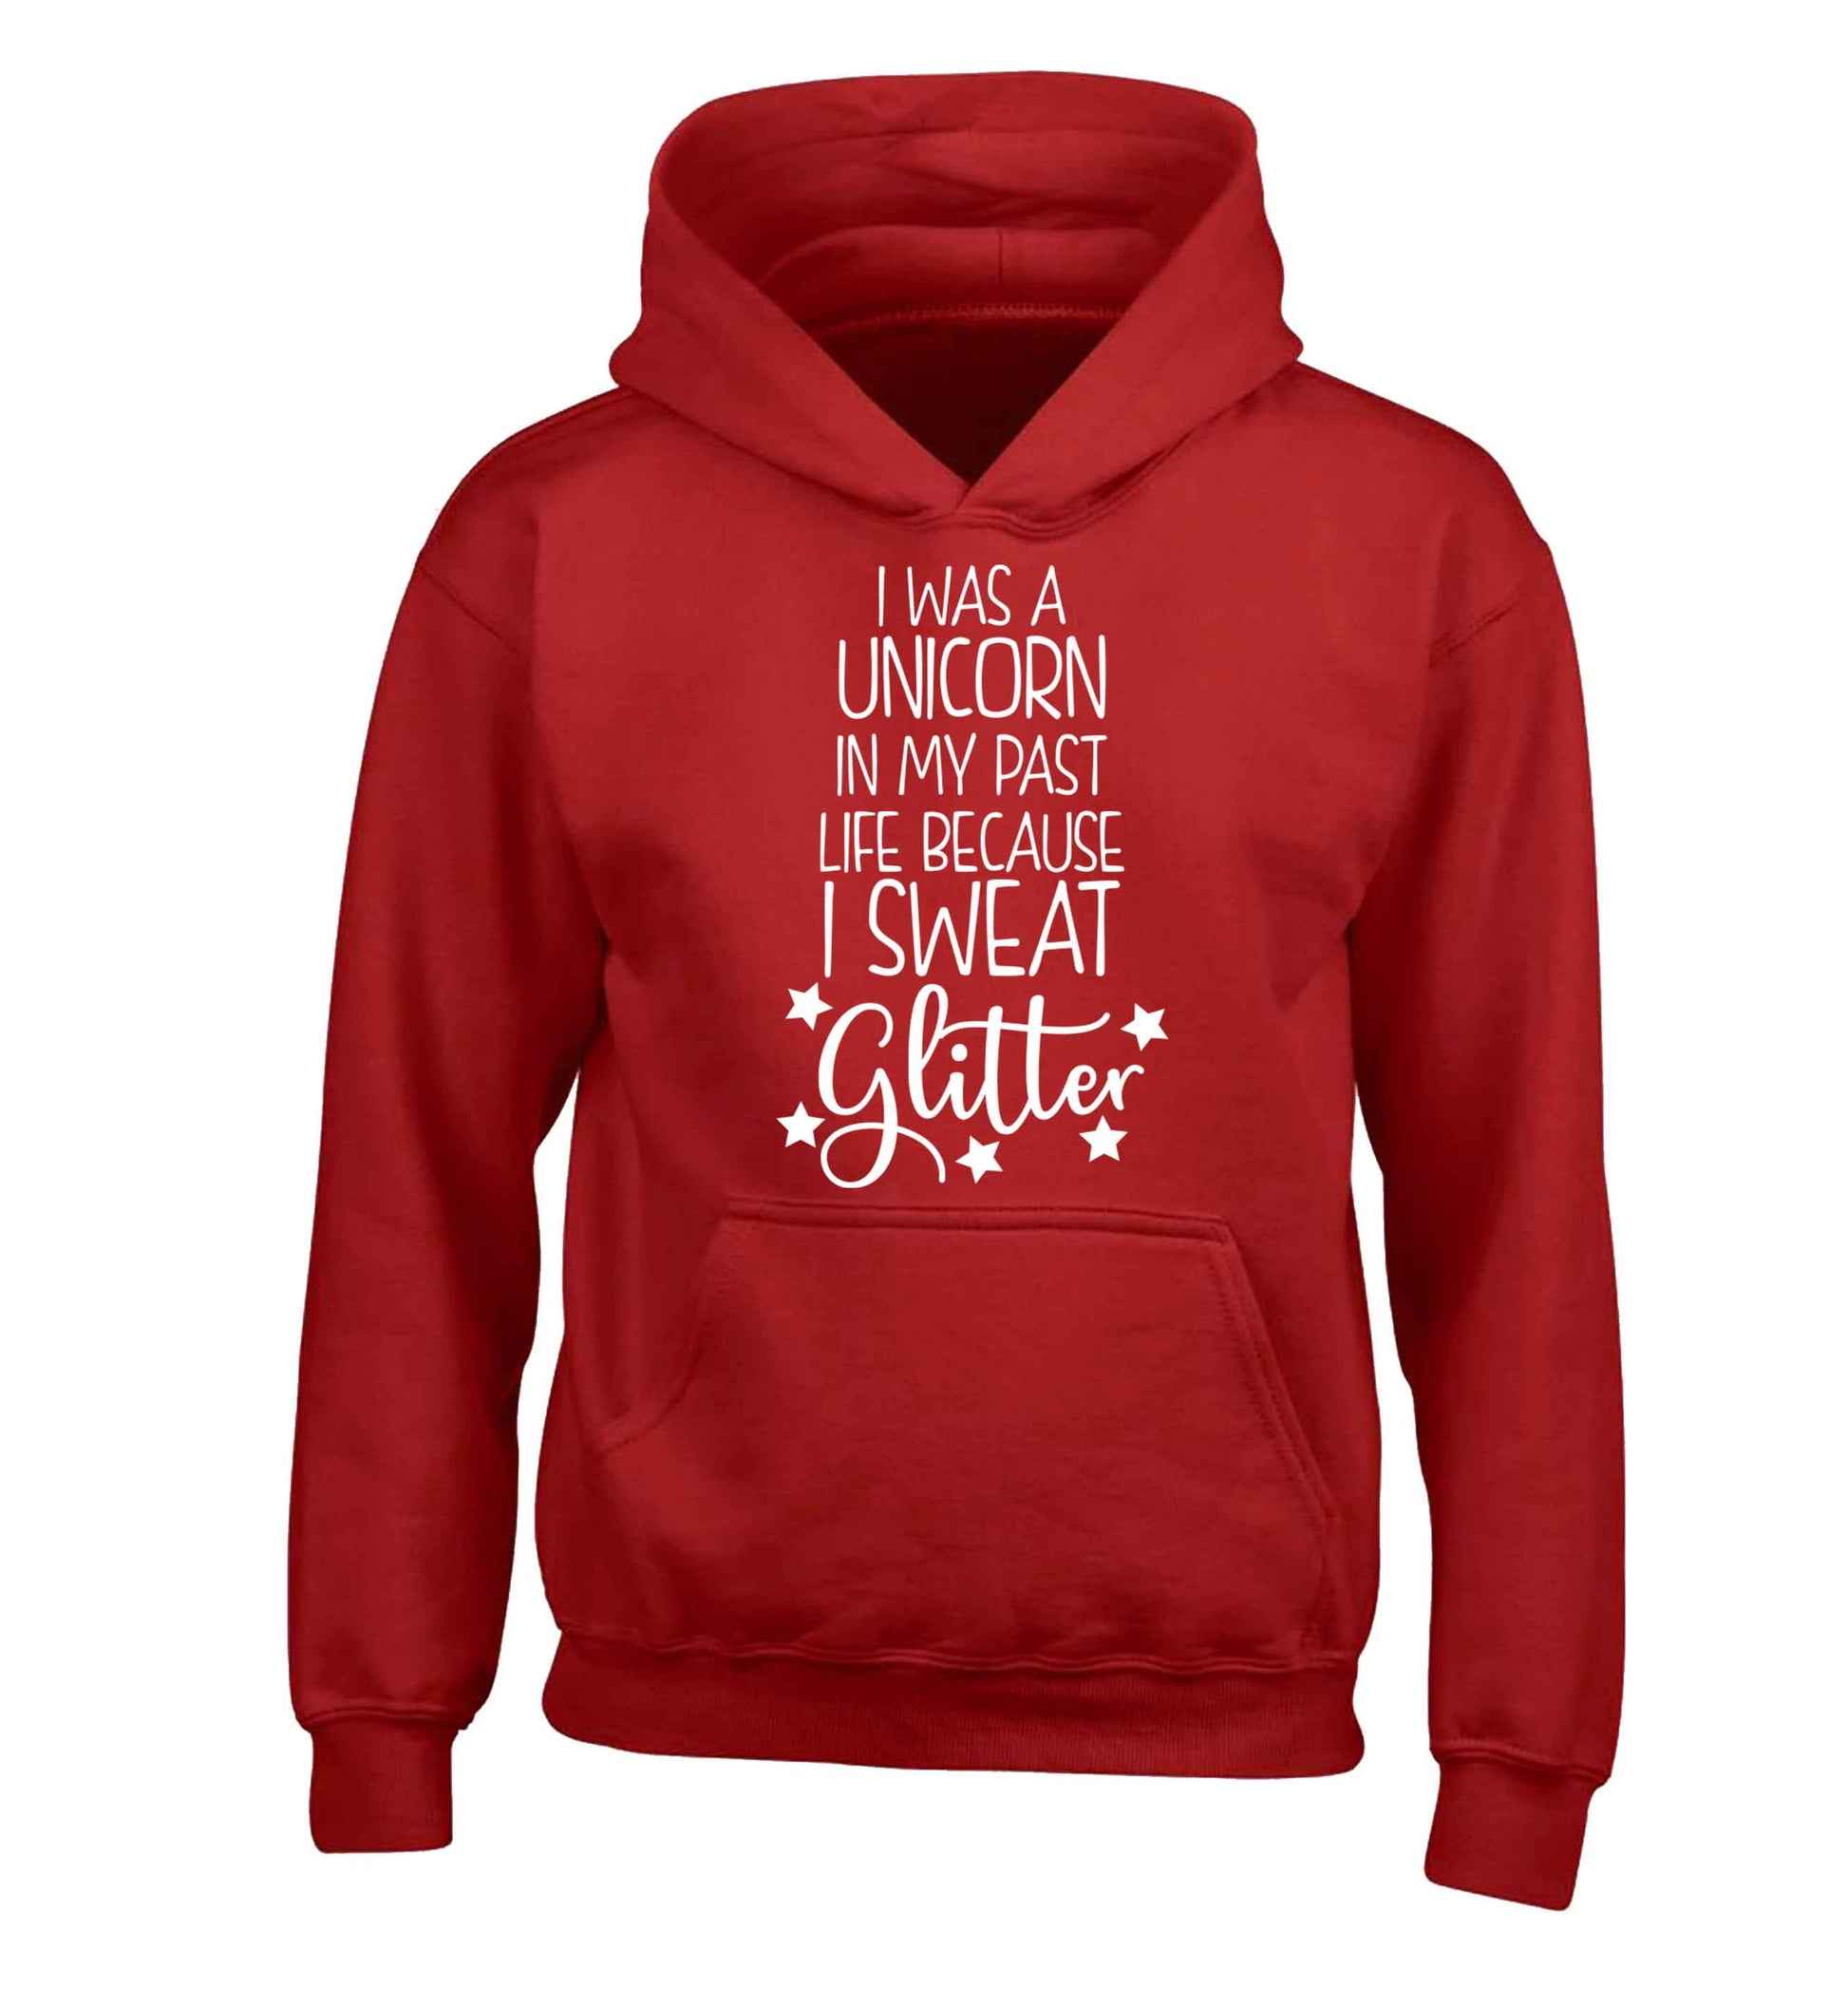 I was a unicorn in my past life because I sweat glitter children's red hoodie 12-13 Years